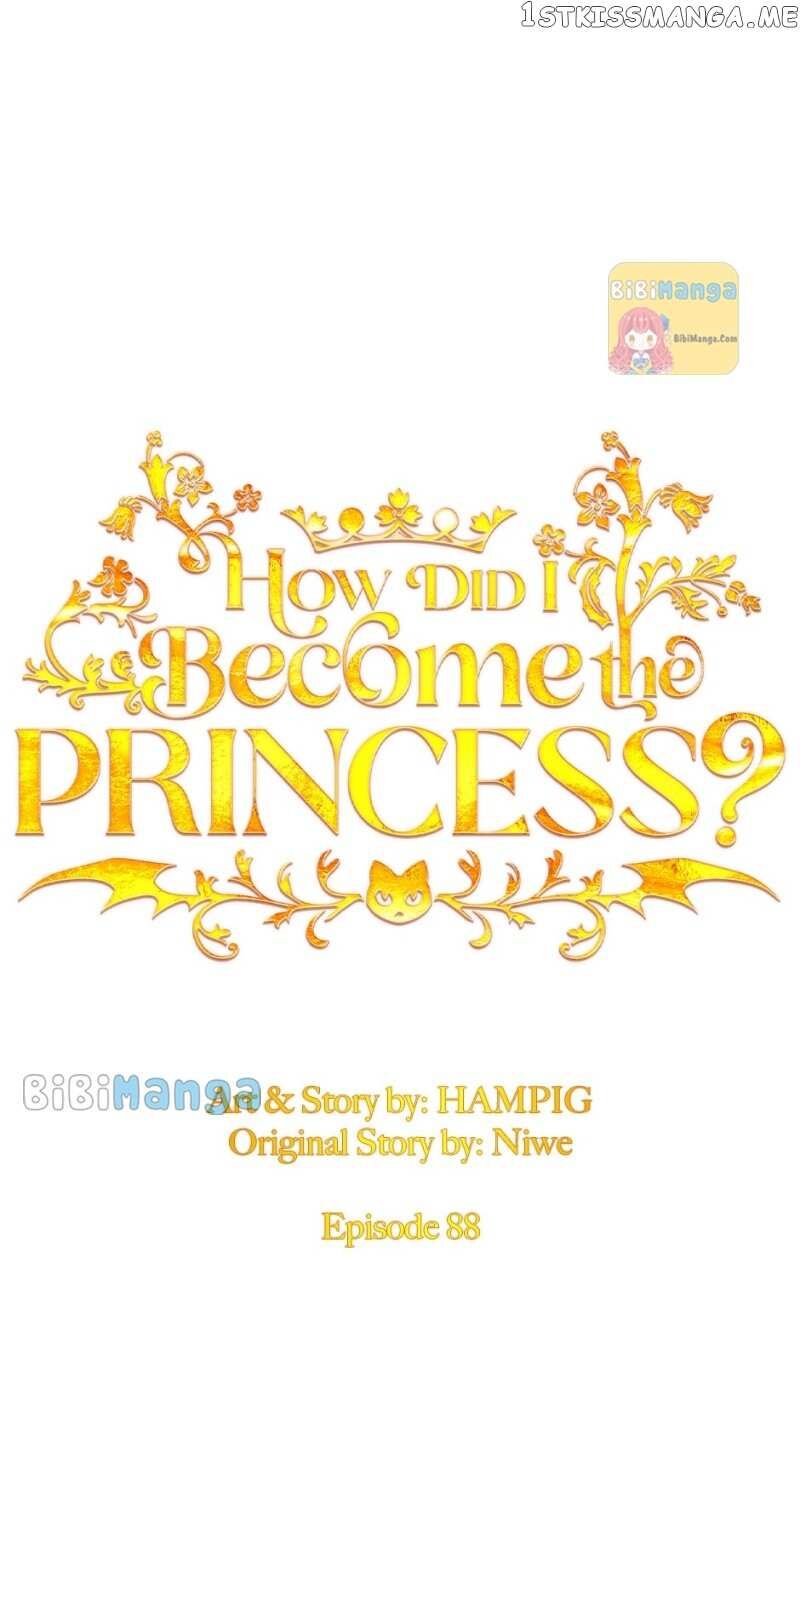 Starting From Today, I'm a Princess?! 88